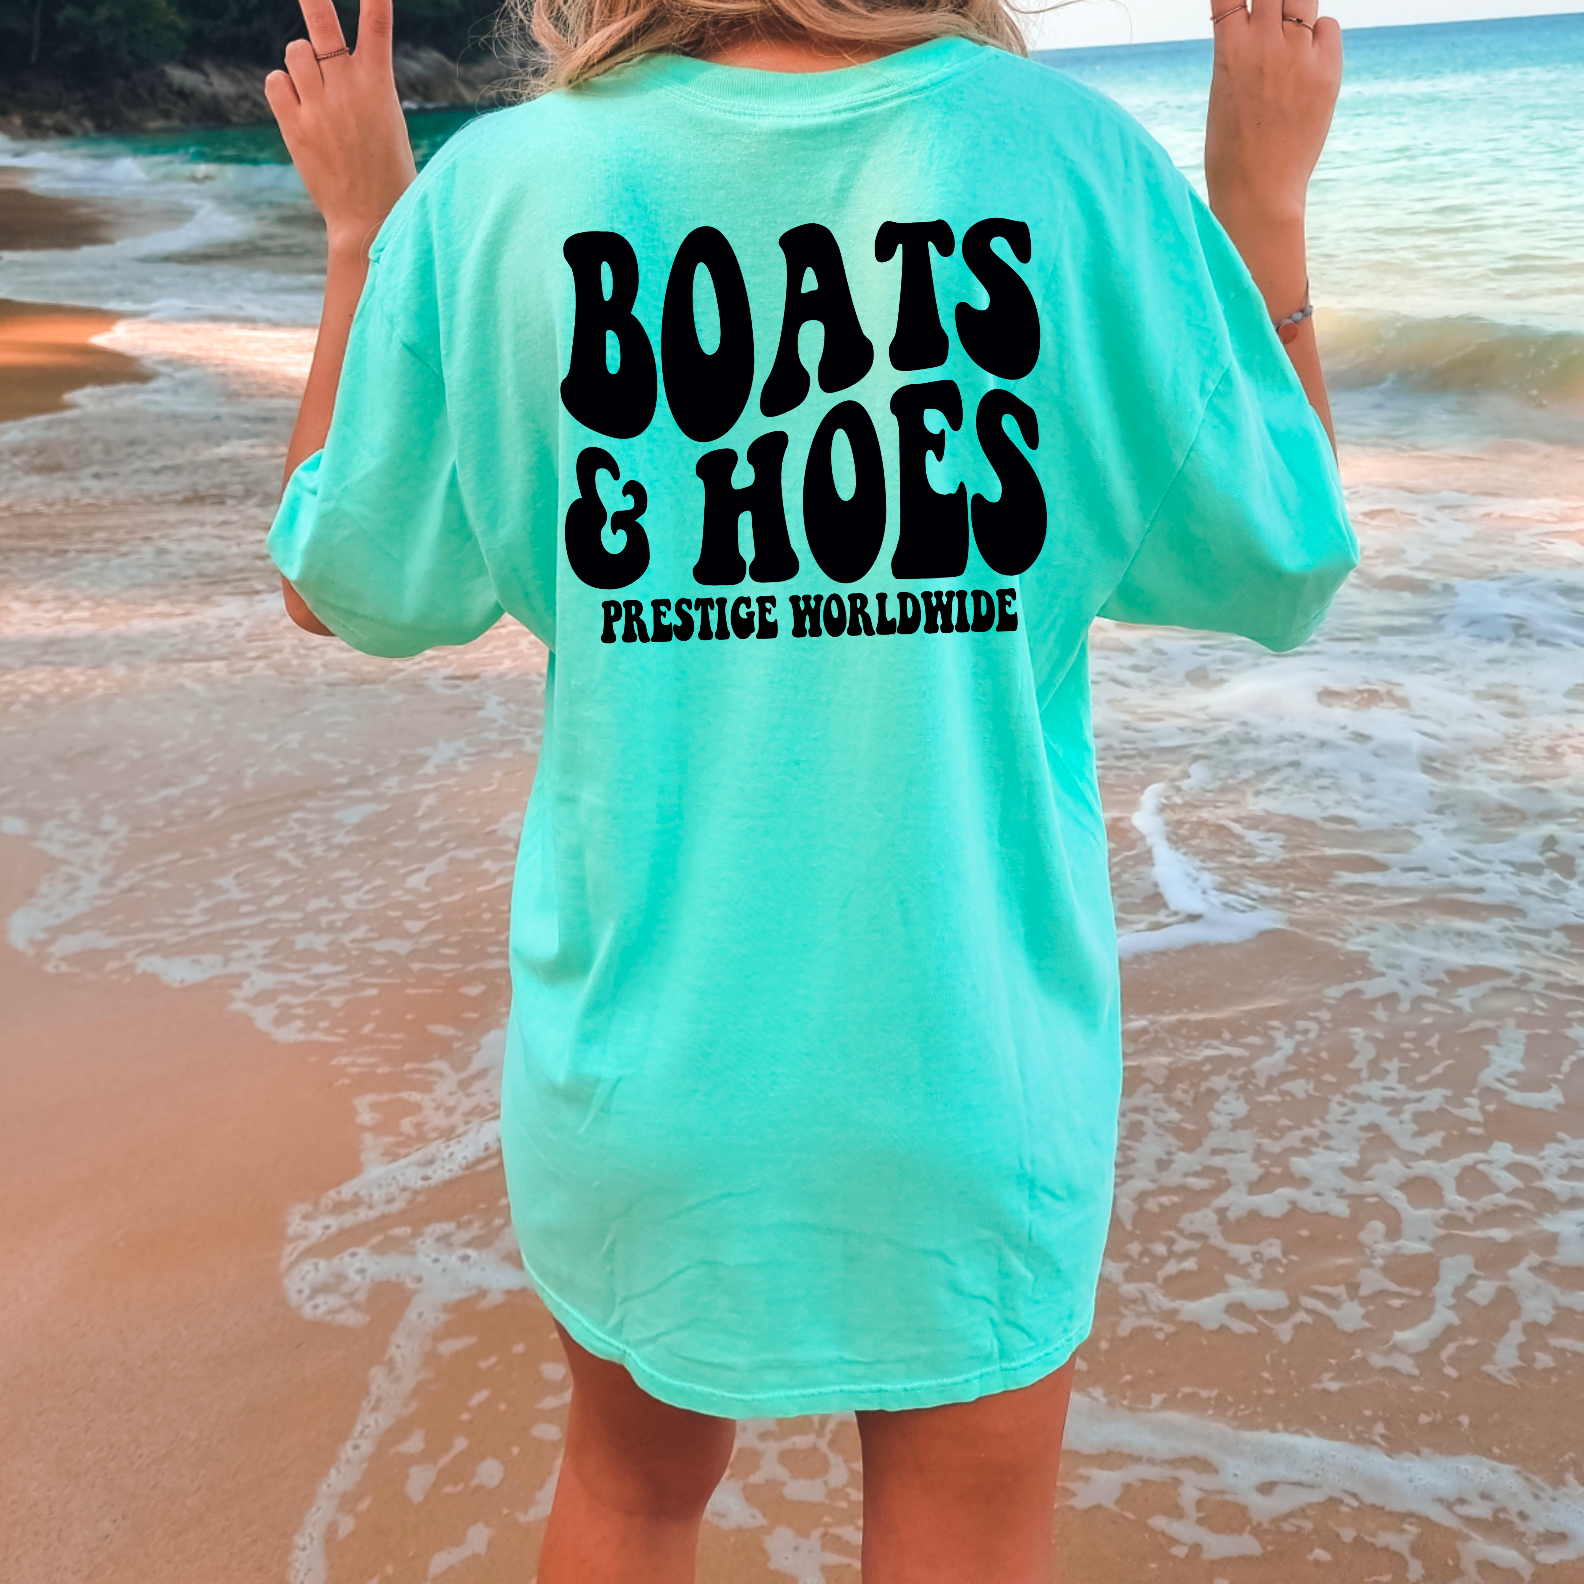 Boats & Hoes Screen Print Transfer